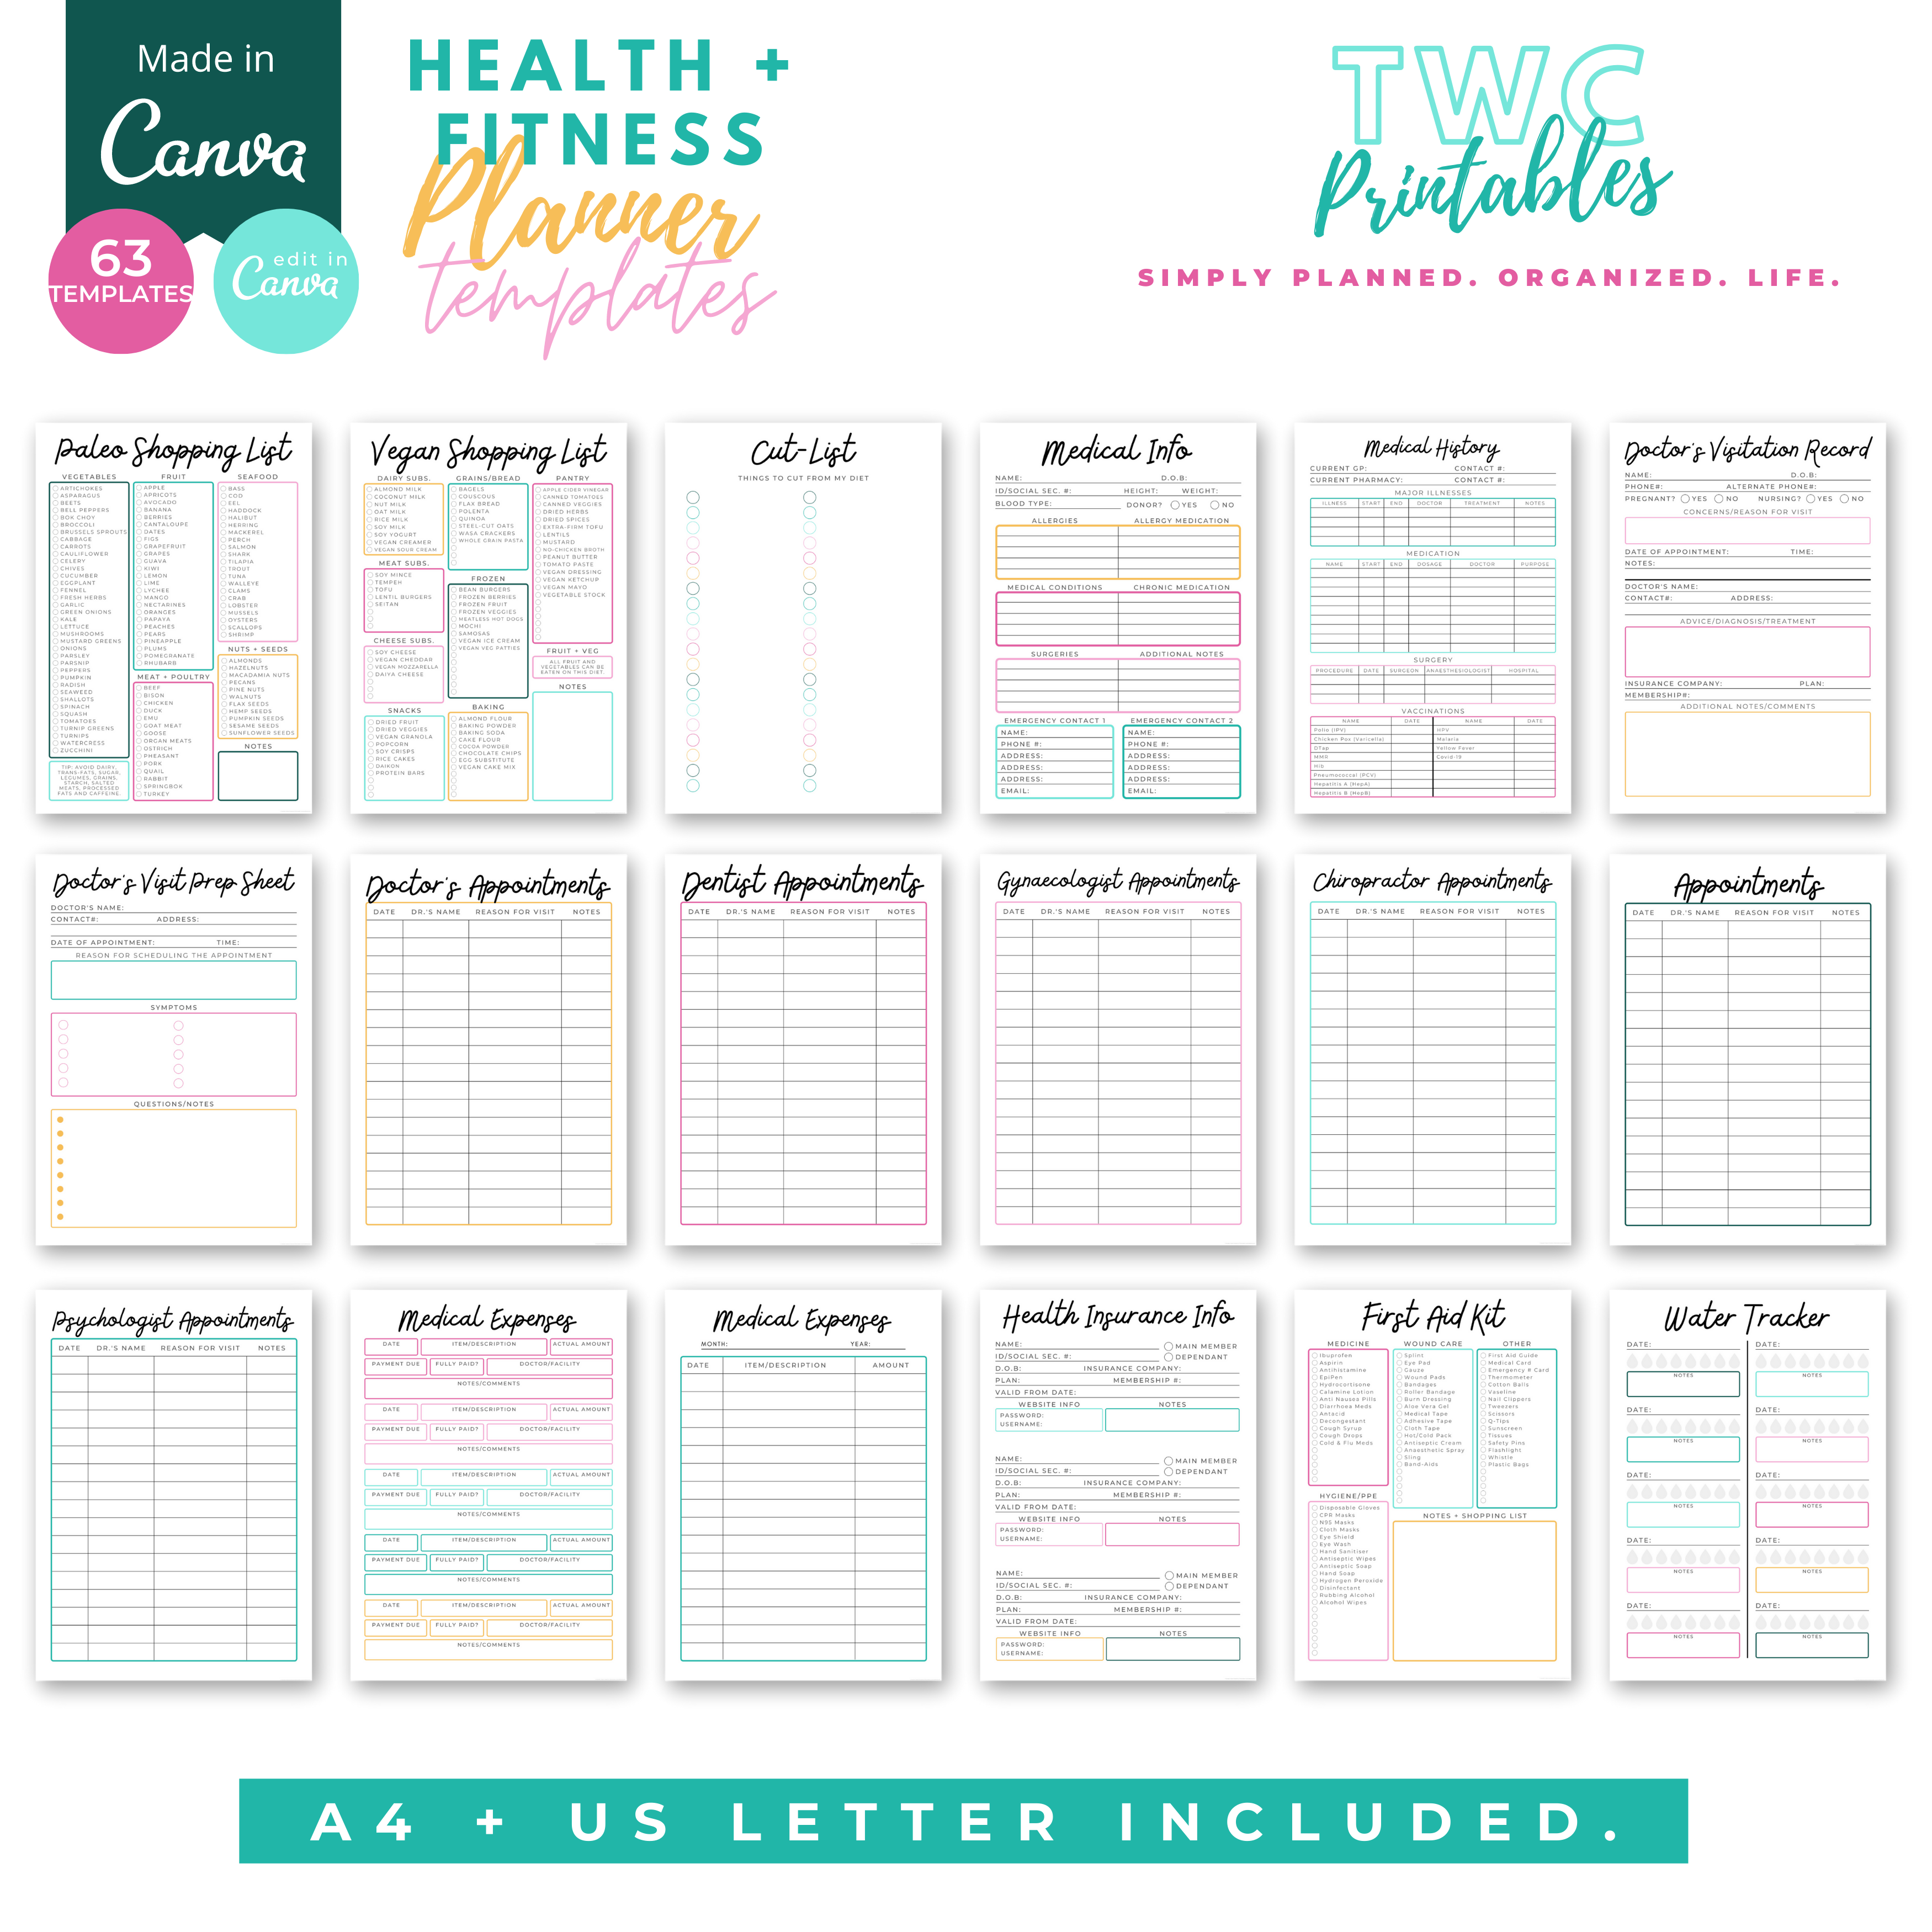 Create your own health & fitness planner with these editable template sheets for Canva! Includes plenty of trackers, charts, checklists, and more to keep your lifestyle organized! This planner is designed with beautiful colors and motifs, which can be changed to your liking or used as is...